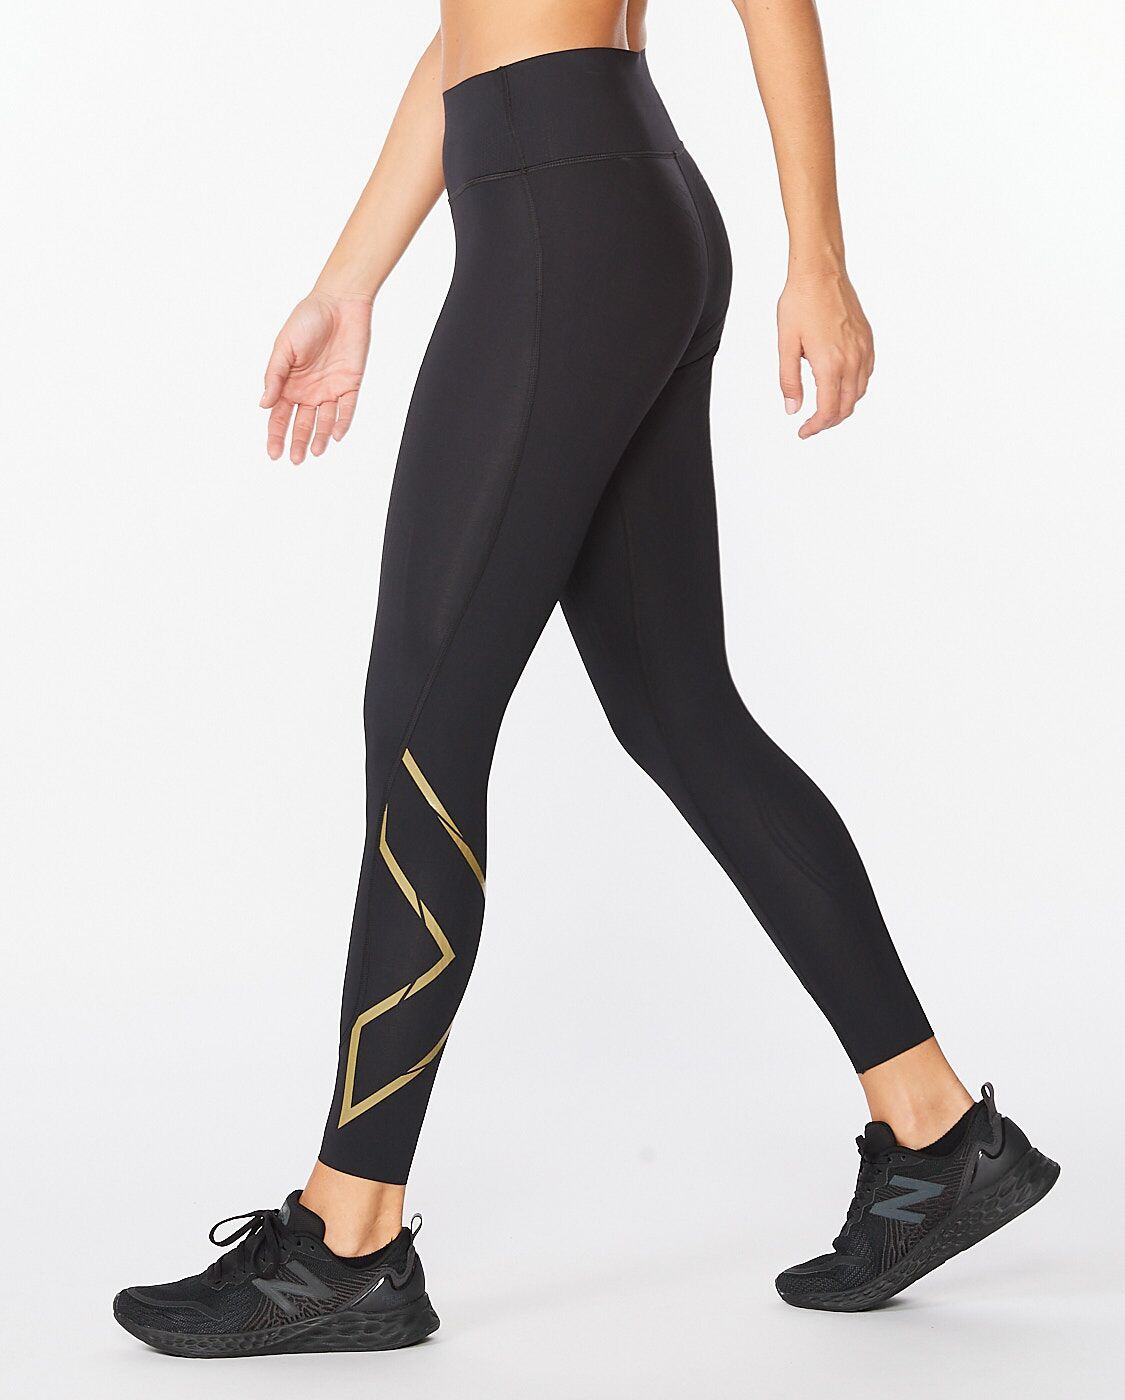 2XU South Africa - Women's Force Mid-Rise Compression Tights - Black/Gold